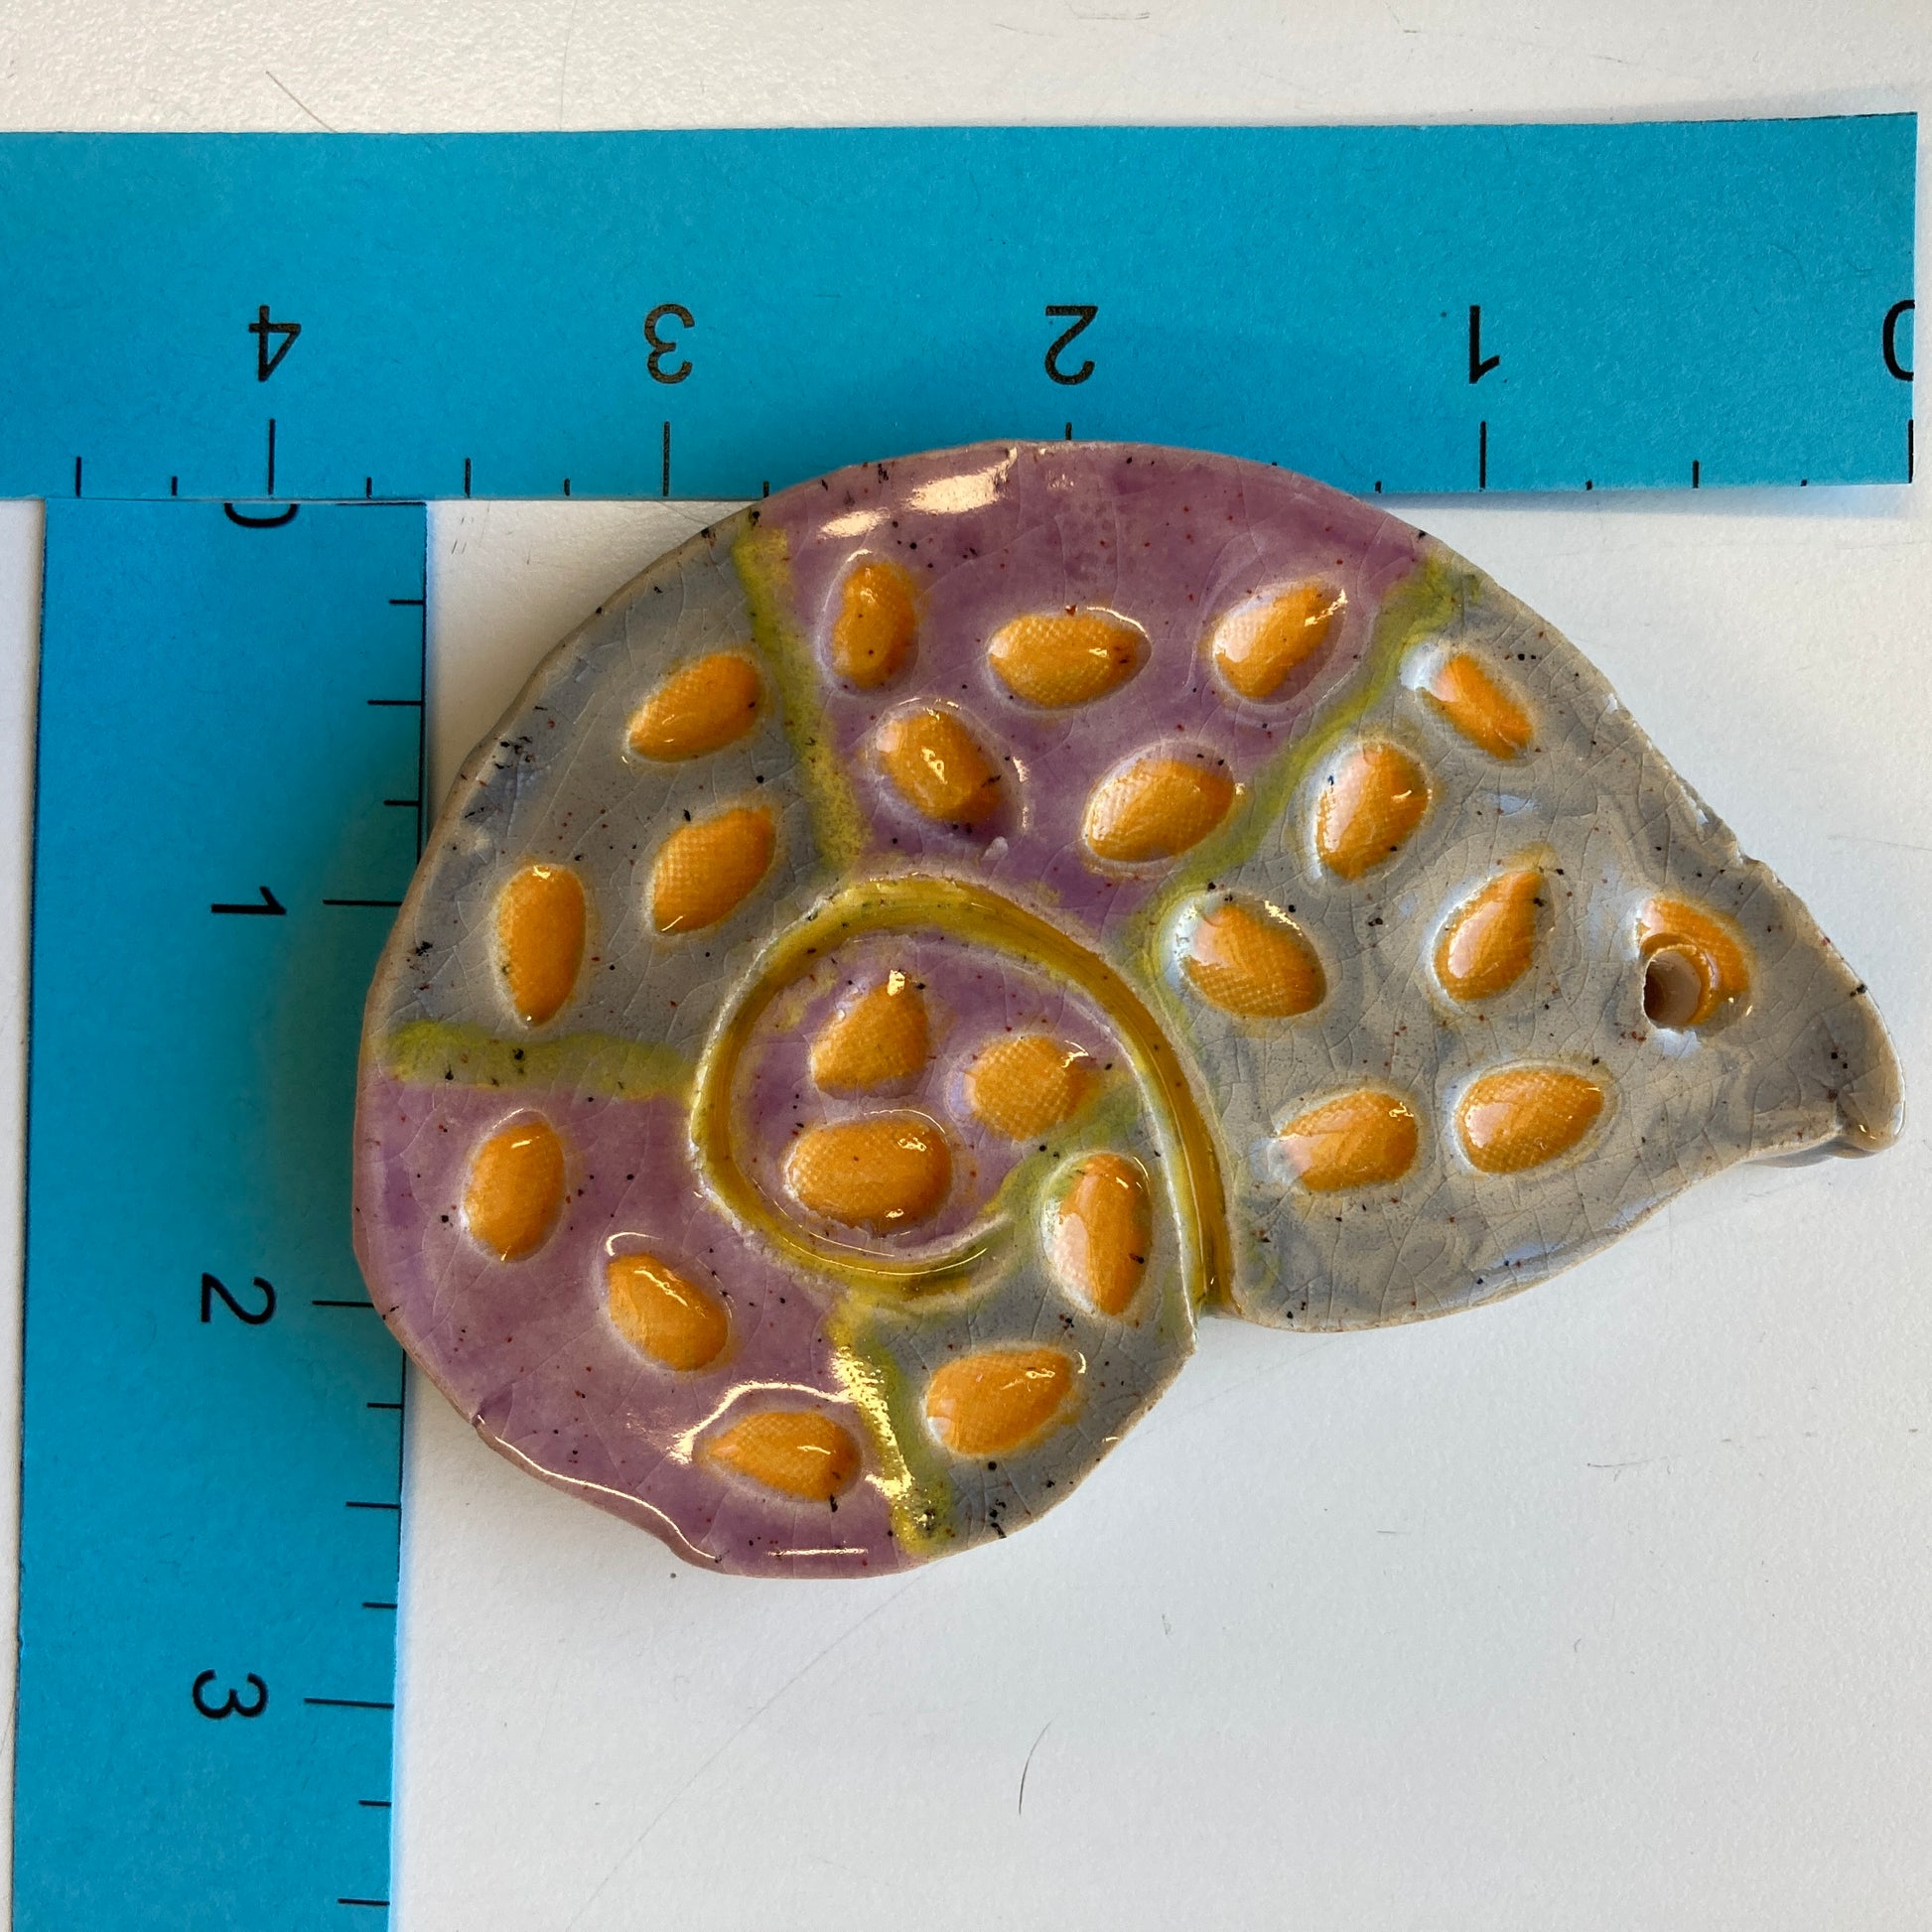 WATCH Resources Art Guild - Ceramic Arts Handmade Clay Crafts Fresh Fish 3.5-inch x 3-inch Glazed Snail Shell by Patrick Toste